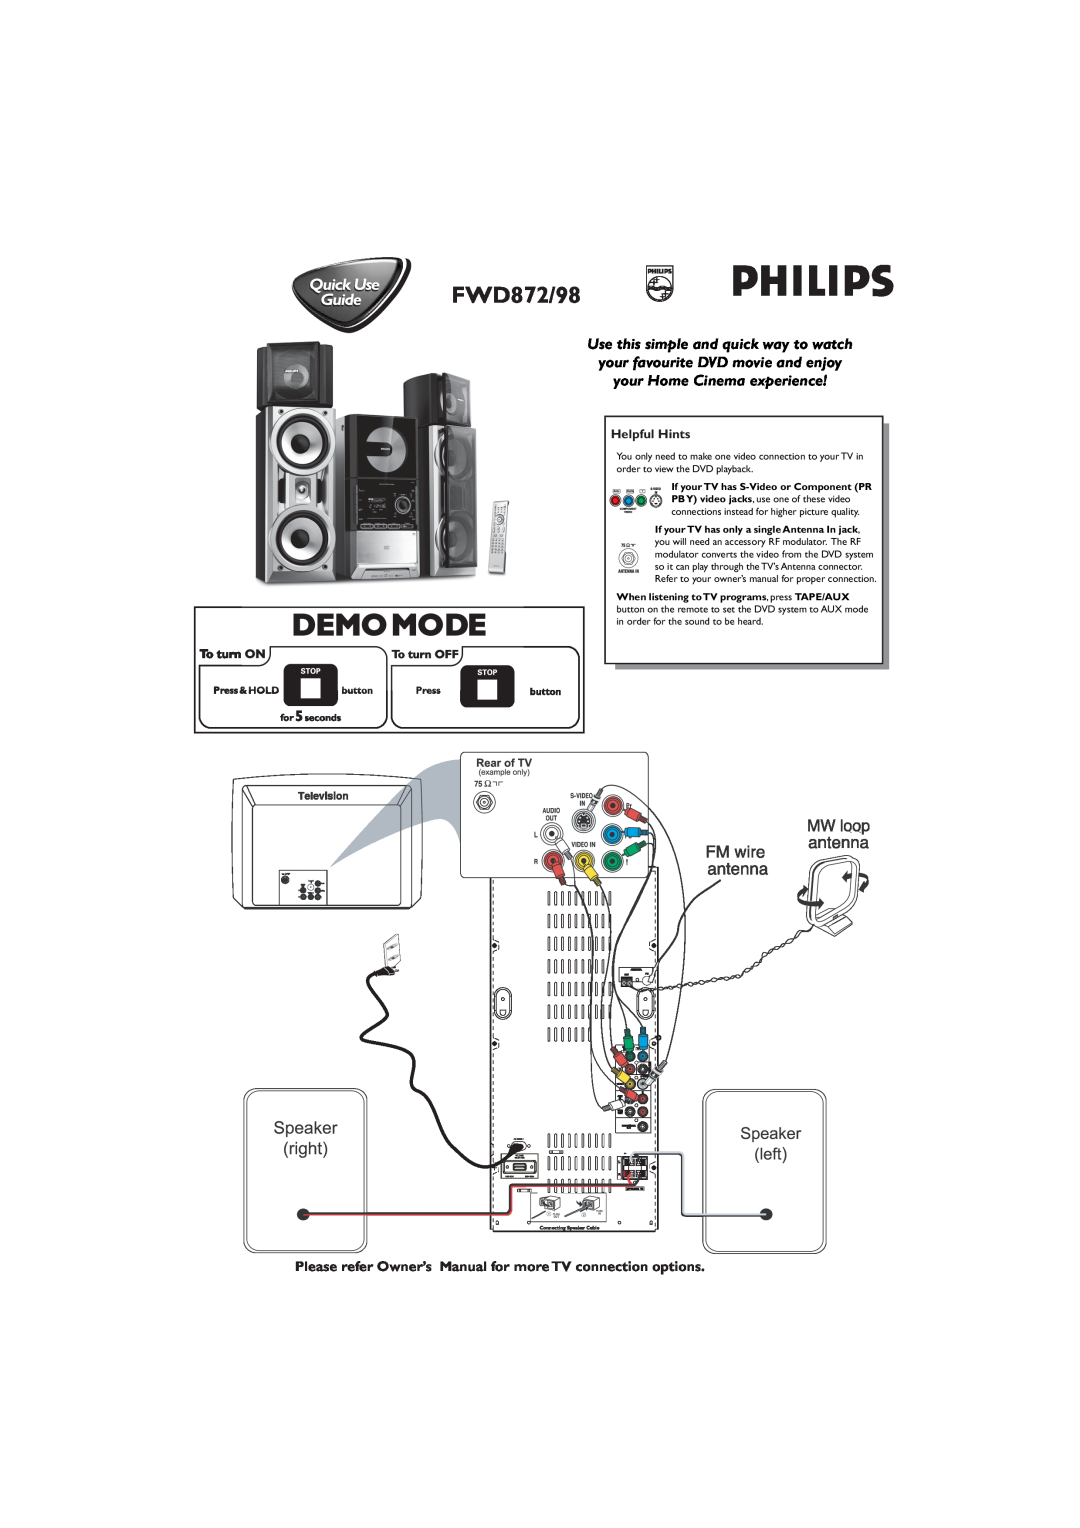 Philips FWD872/98 owner manual Helpful Hints 